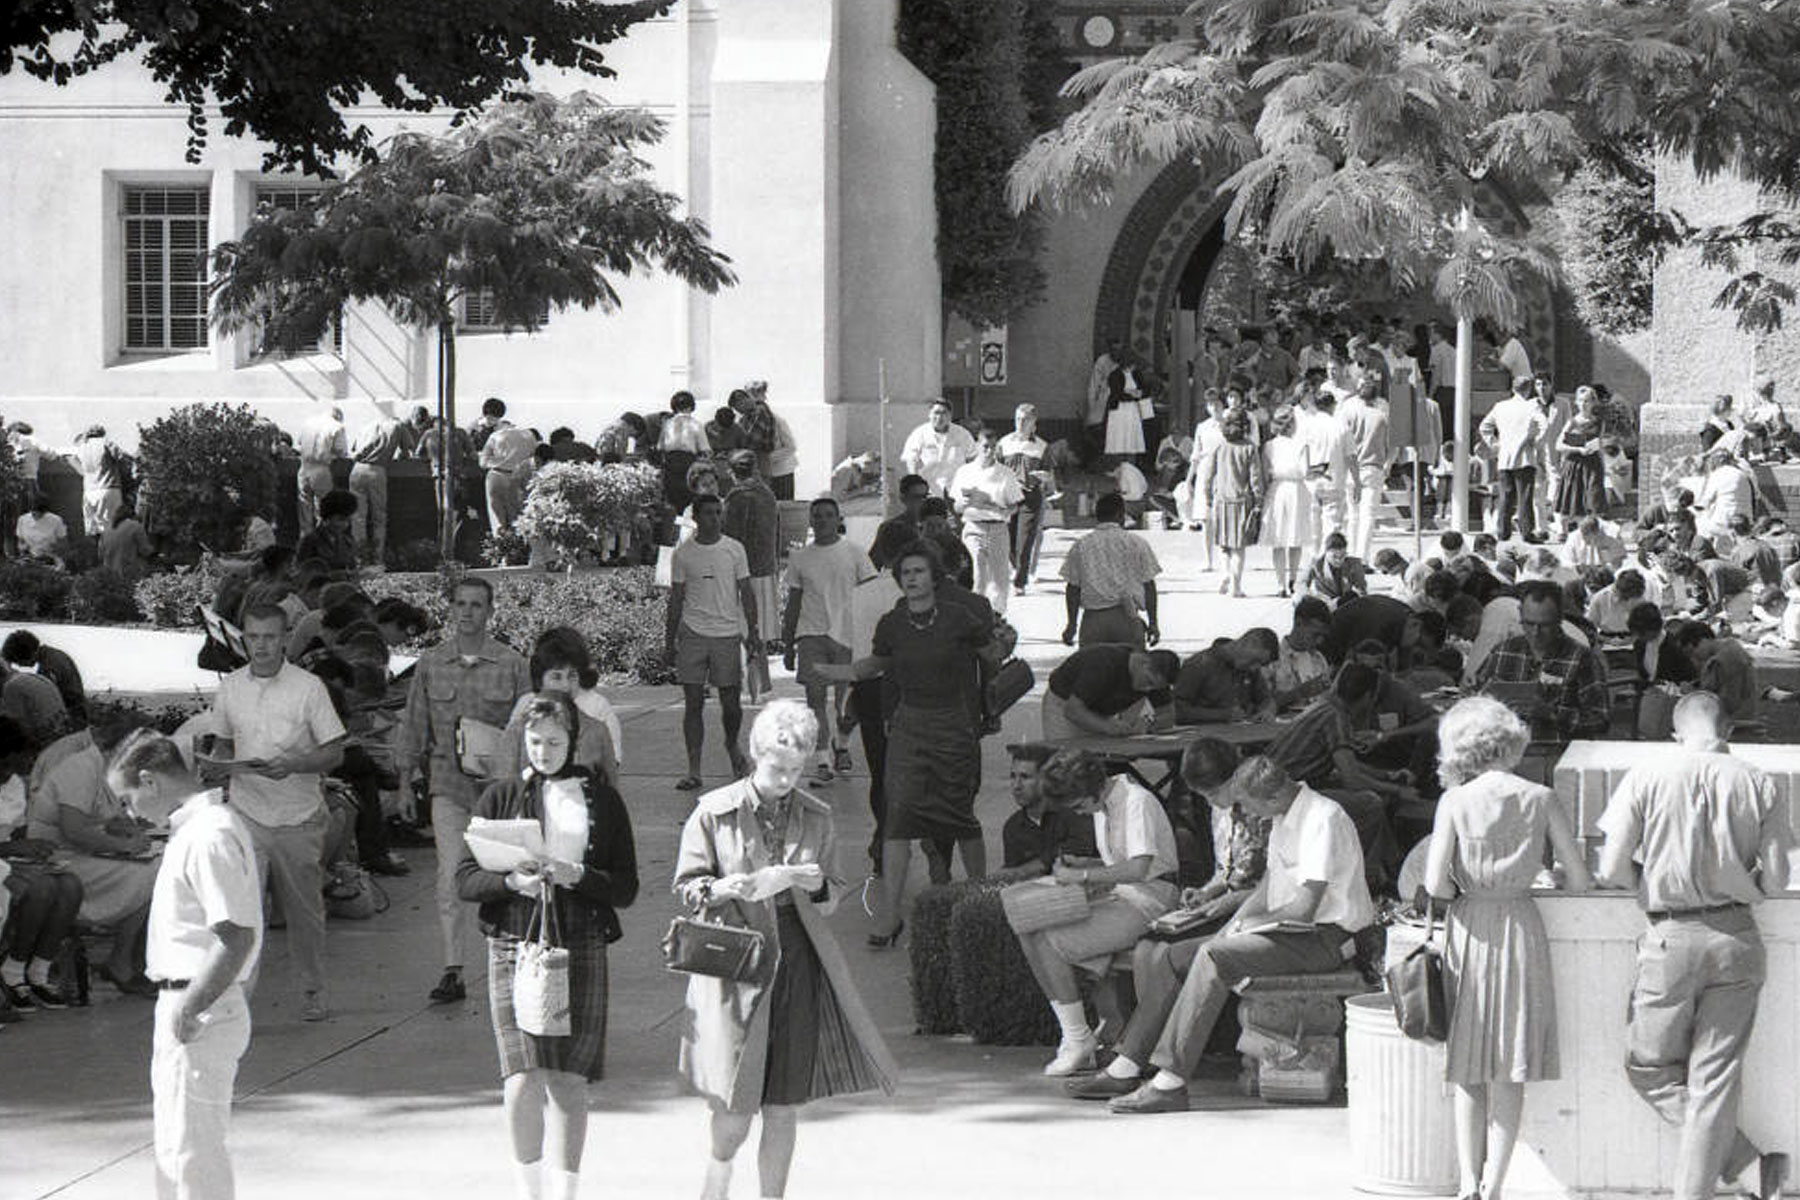 SJSU students gathered in the quad.